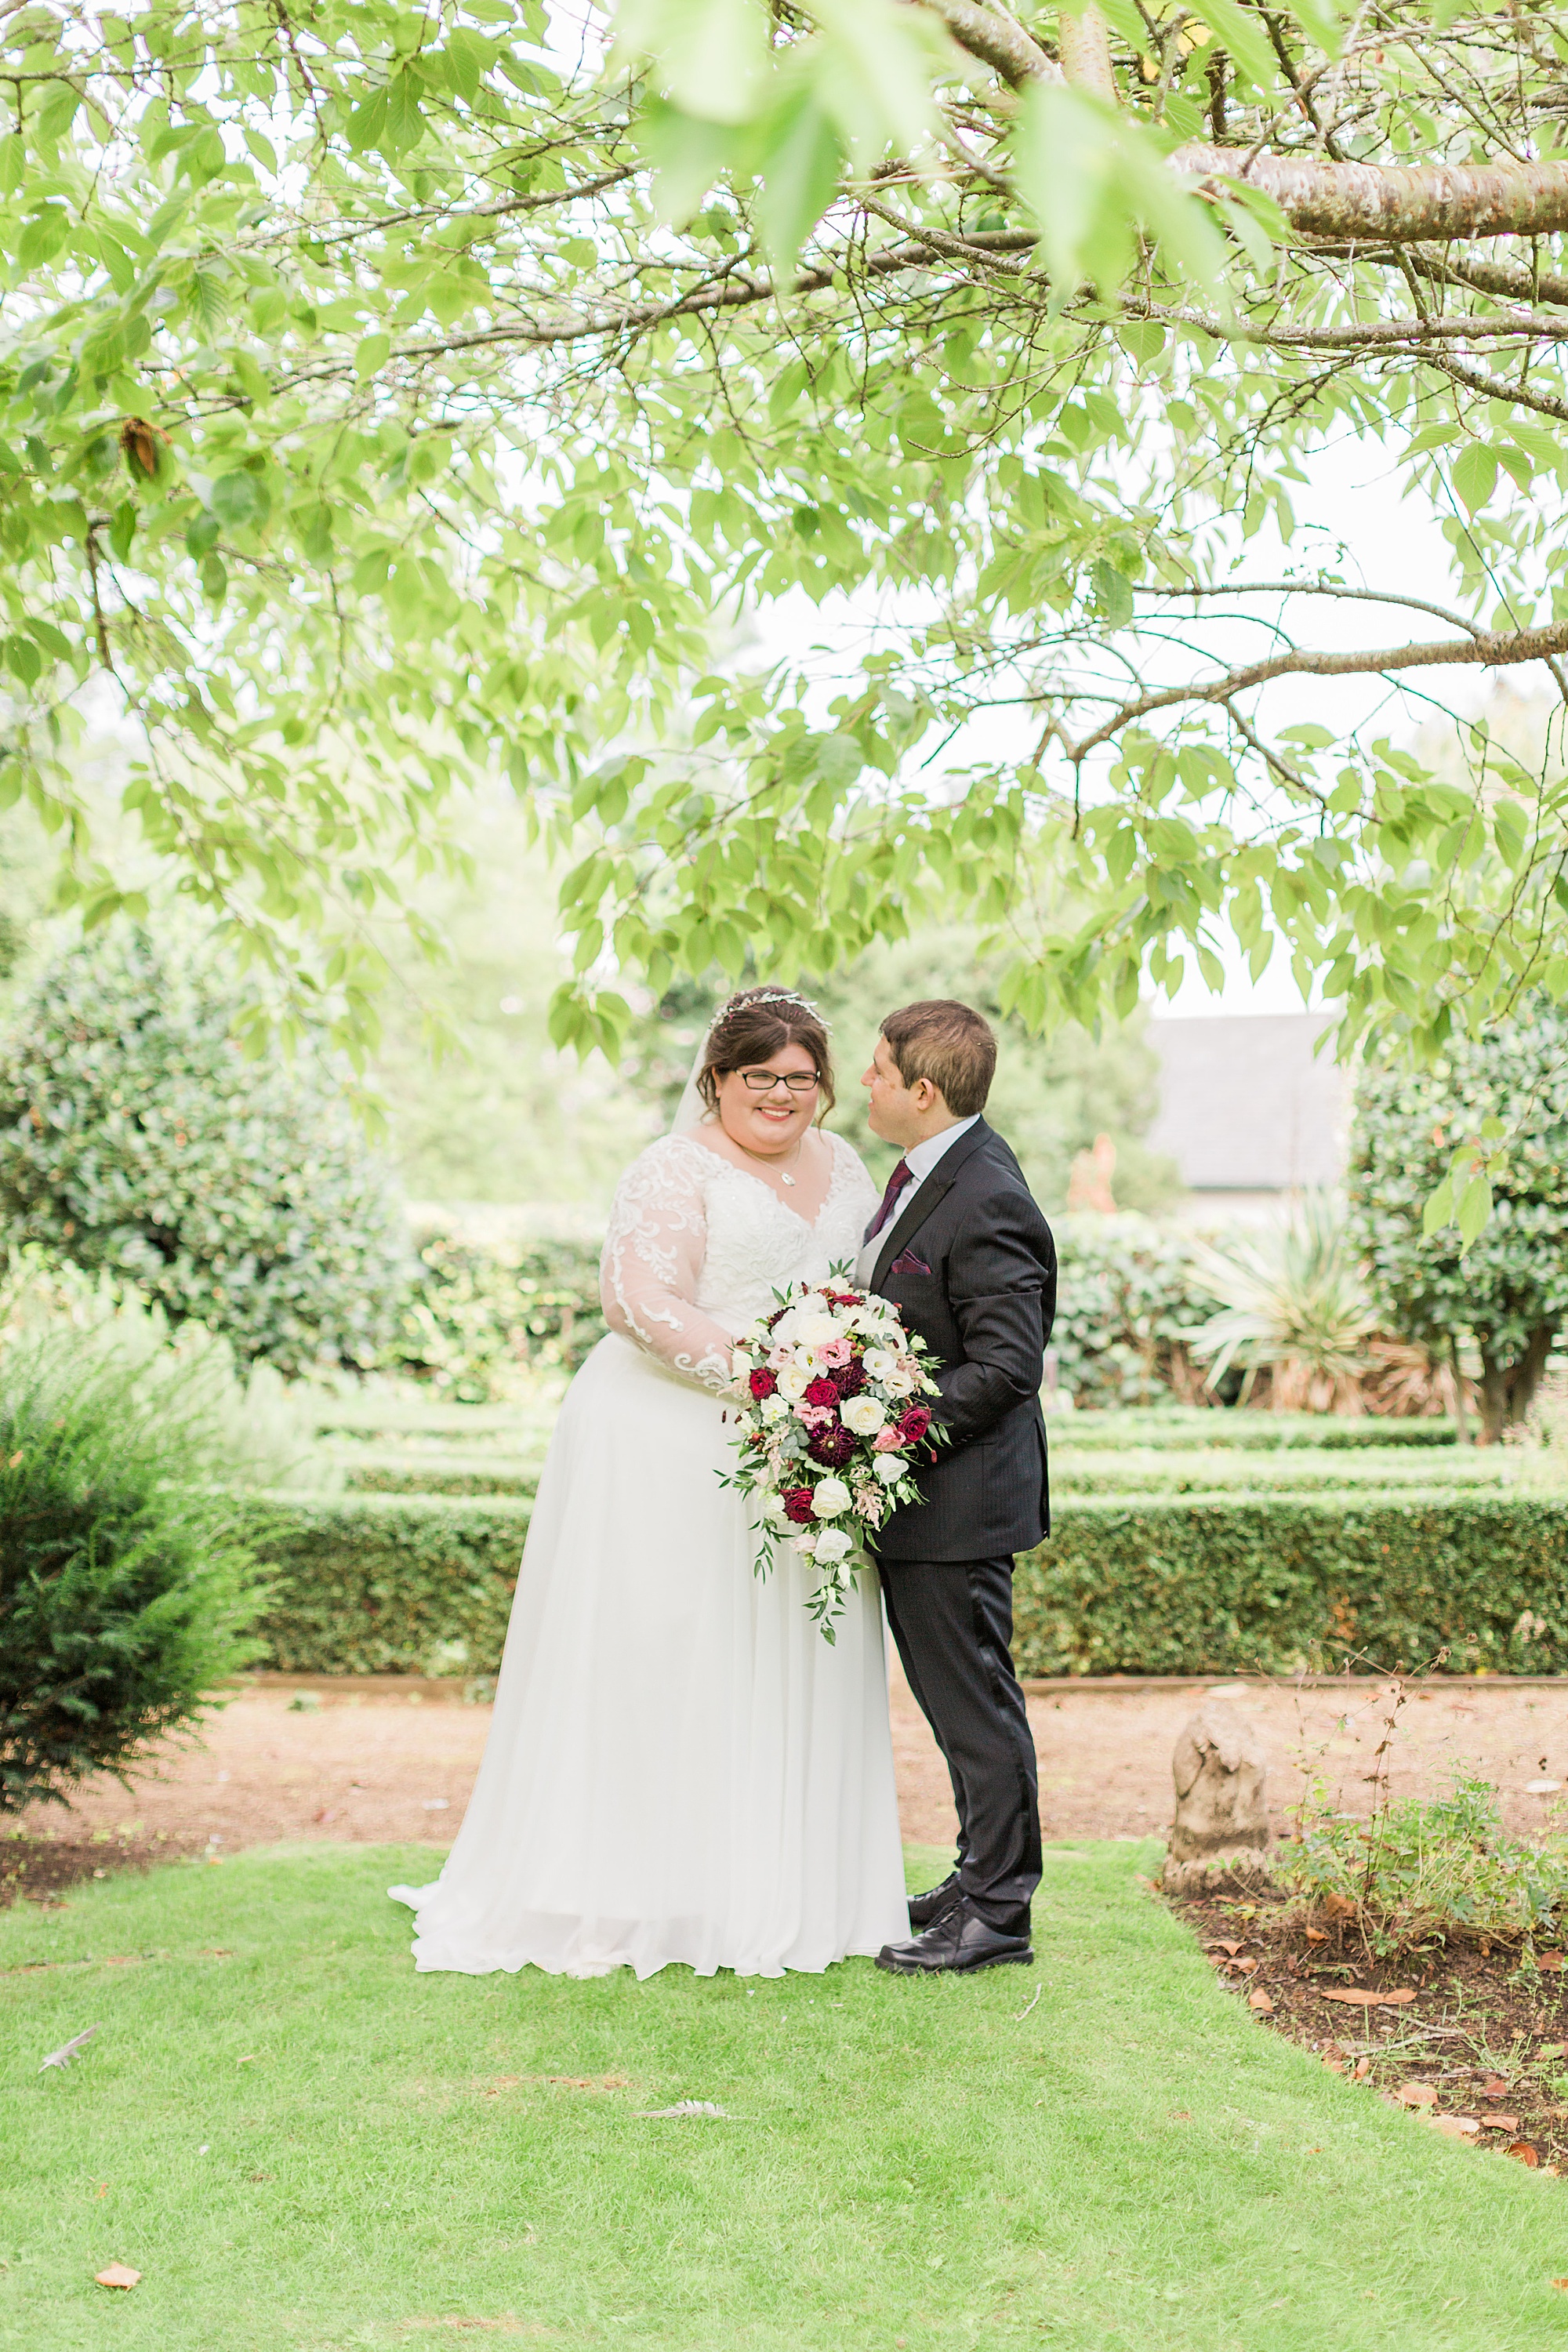 photo of a bride and groom at their wedding surrounded by trees and greenery, groom is facing in towards his bride and they're joined hands by her bouquet 